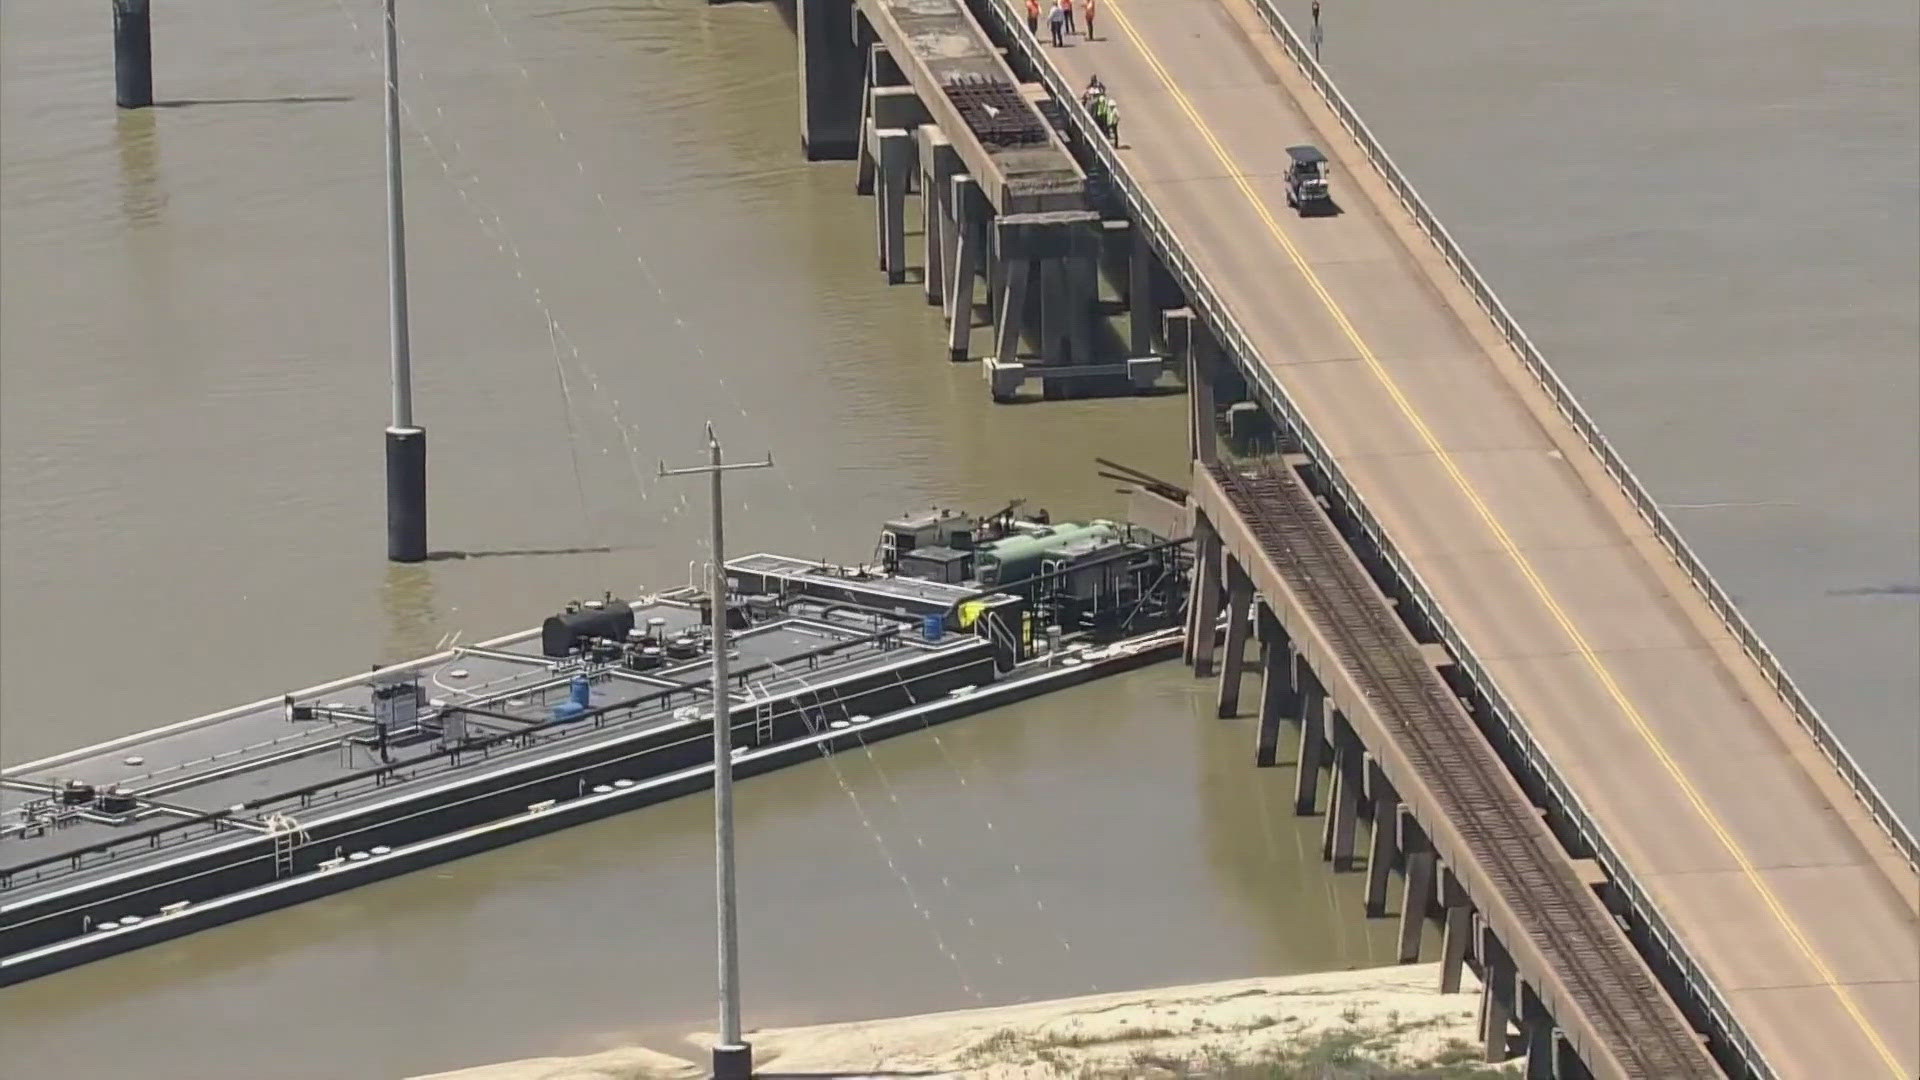 A portion of the bridge collapsed following the collision, but no injuries have been reported.